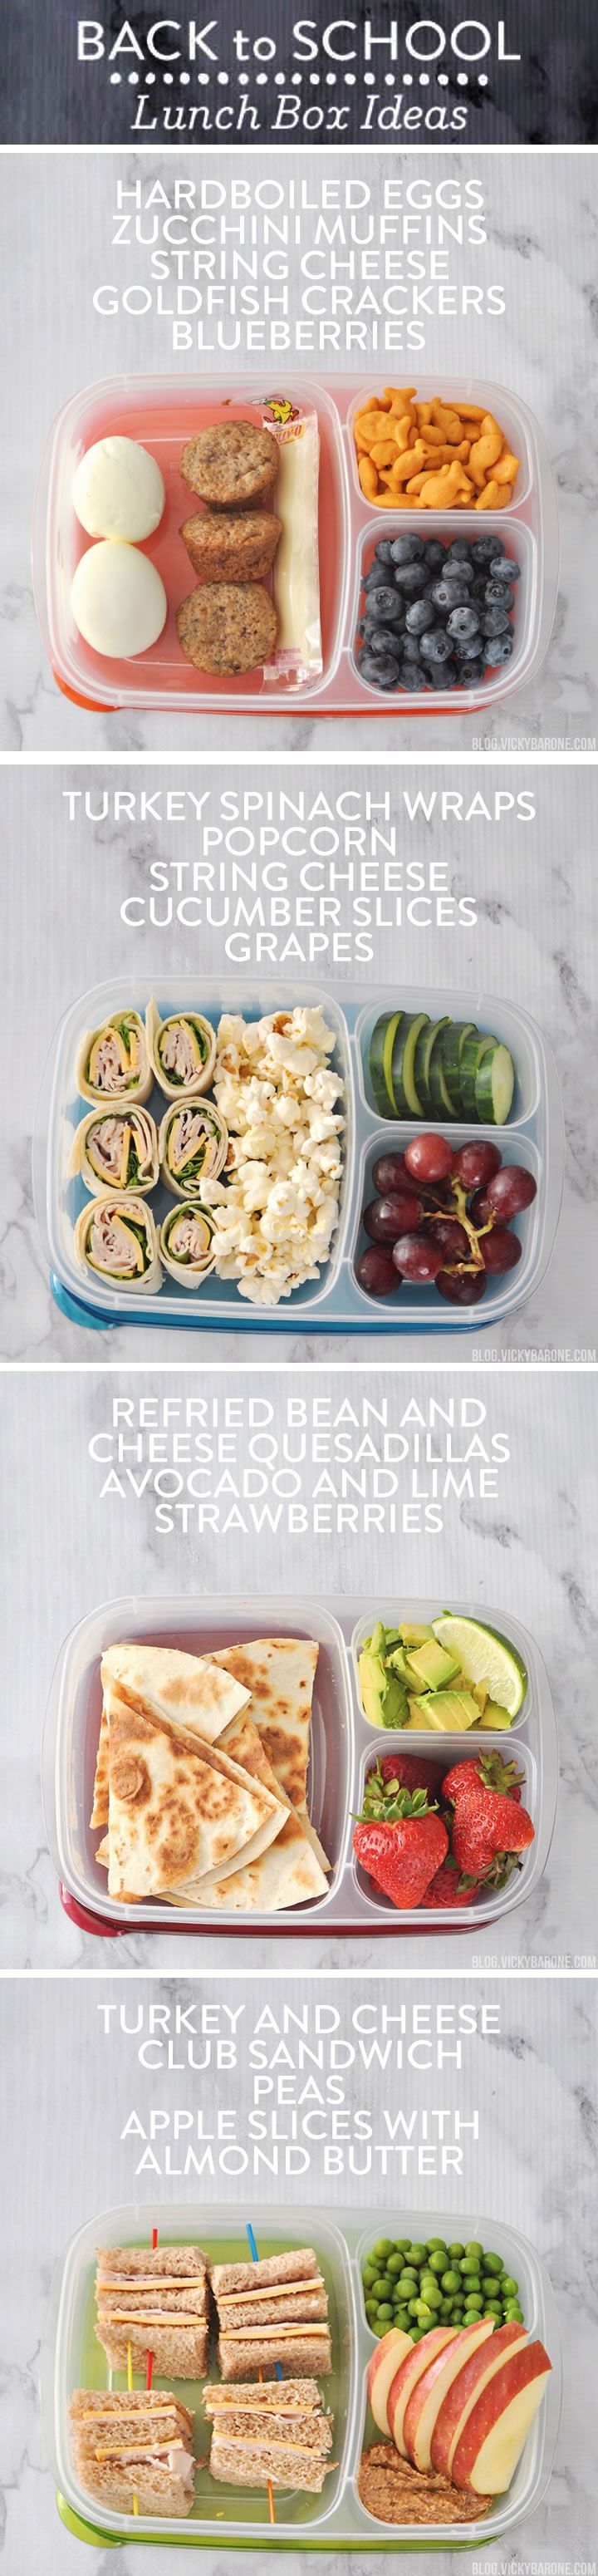 Yummy packed lunch ideas for when you’re stumped on what to send your kiddo to school with. Packed in @EasyLunchboxes, these